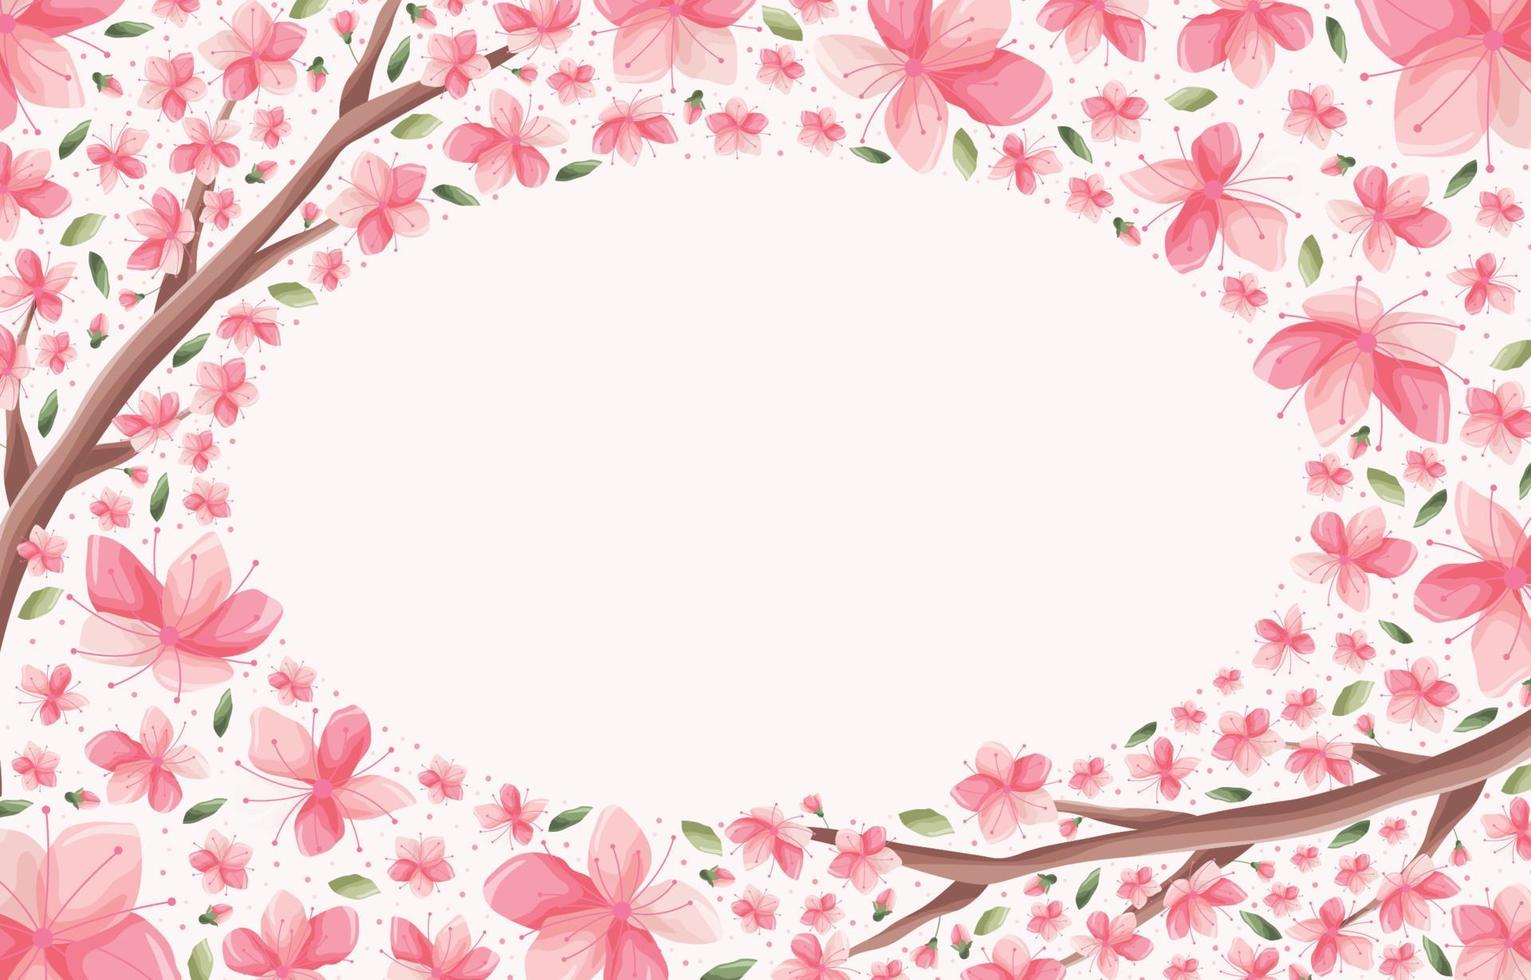 Cherry Blossom Blooming Flower Background vector